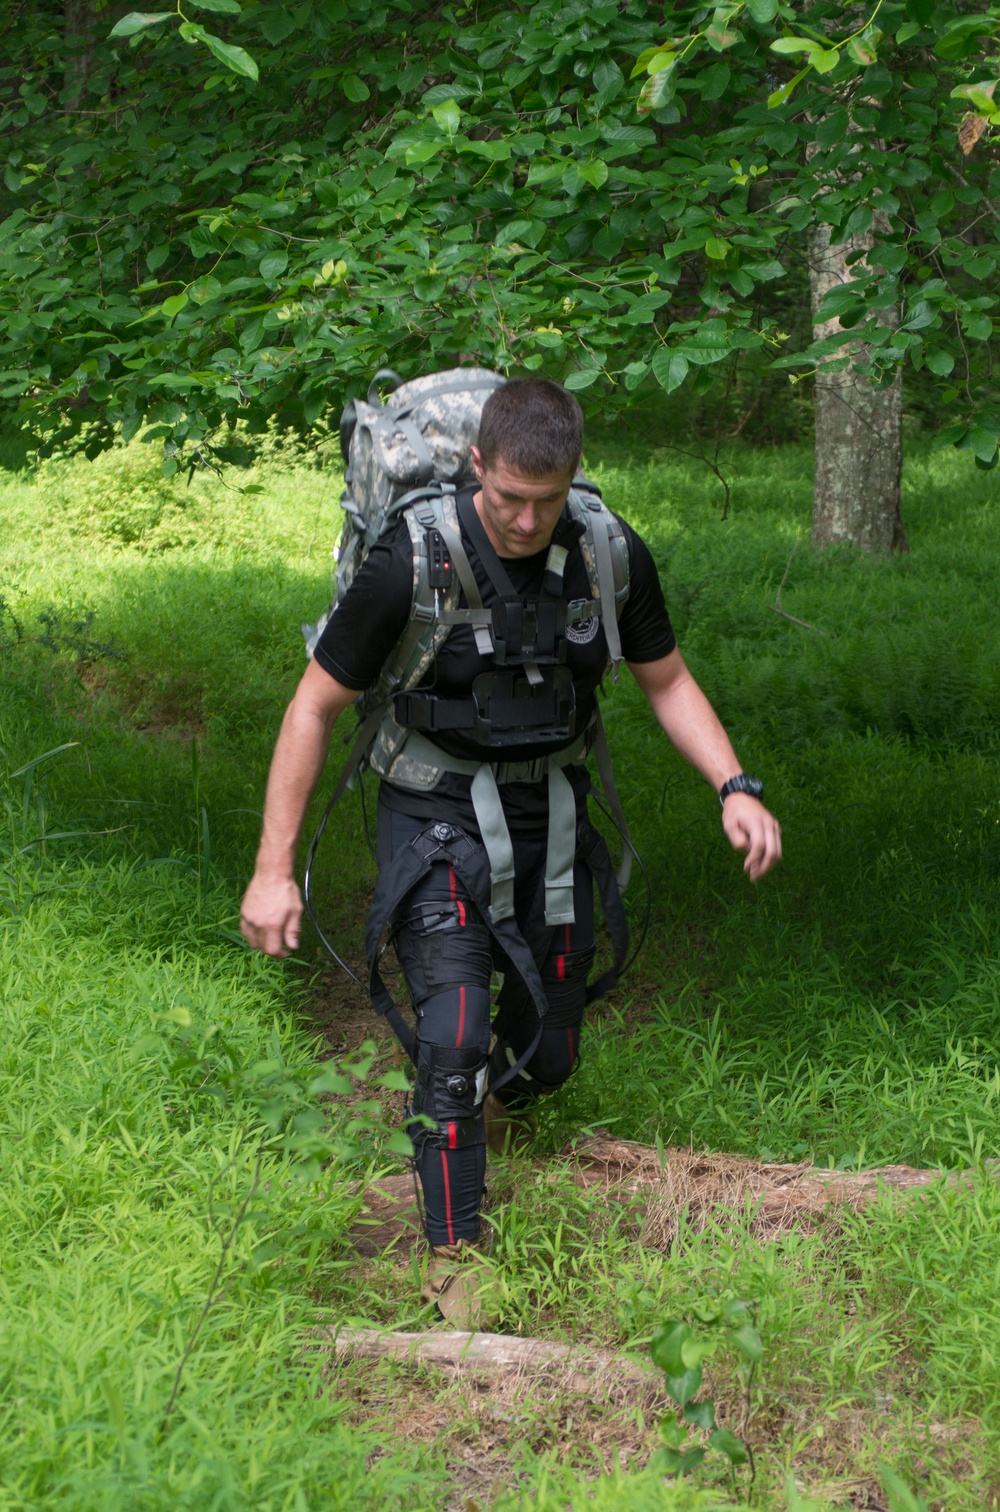 Prototype exoskeleton suit would improve Soldiers' physical, mental performance